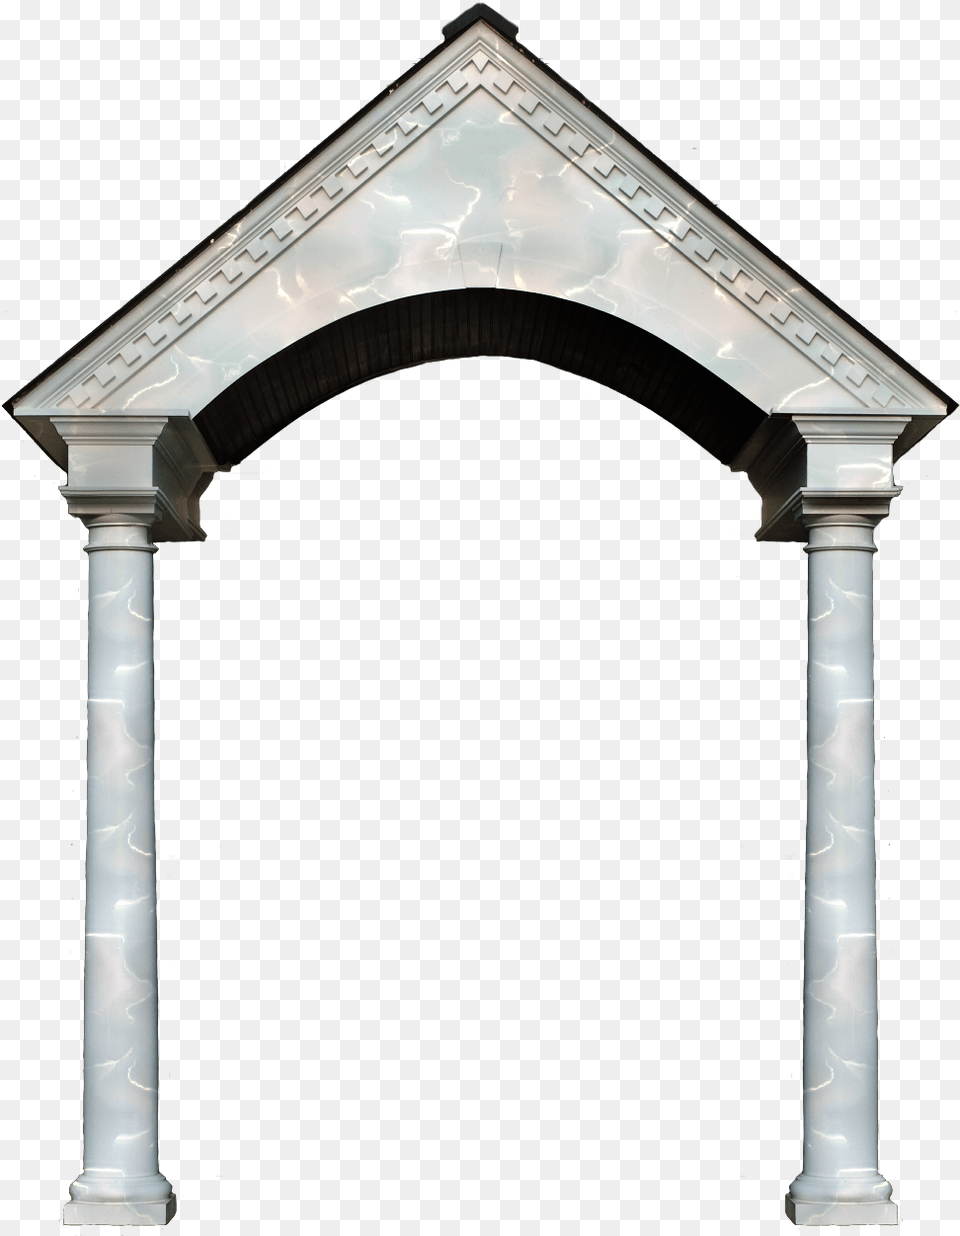 Ftestickers Arch Entrance Architecture Stone Transparent Arch Free Png